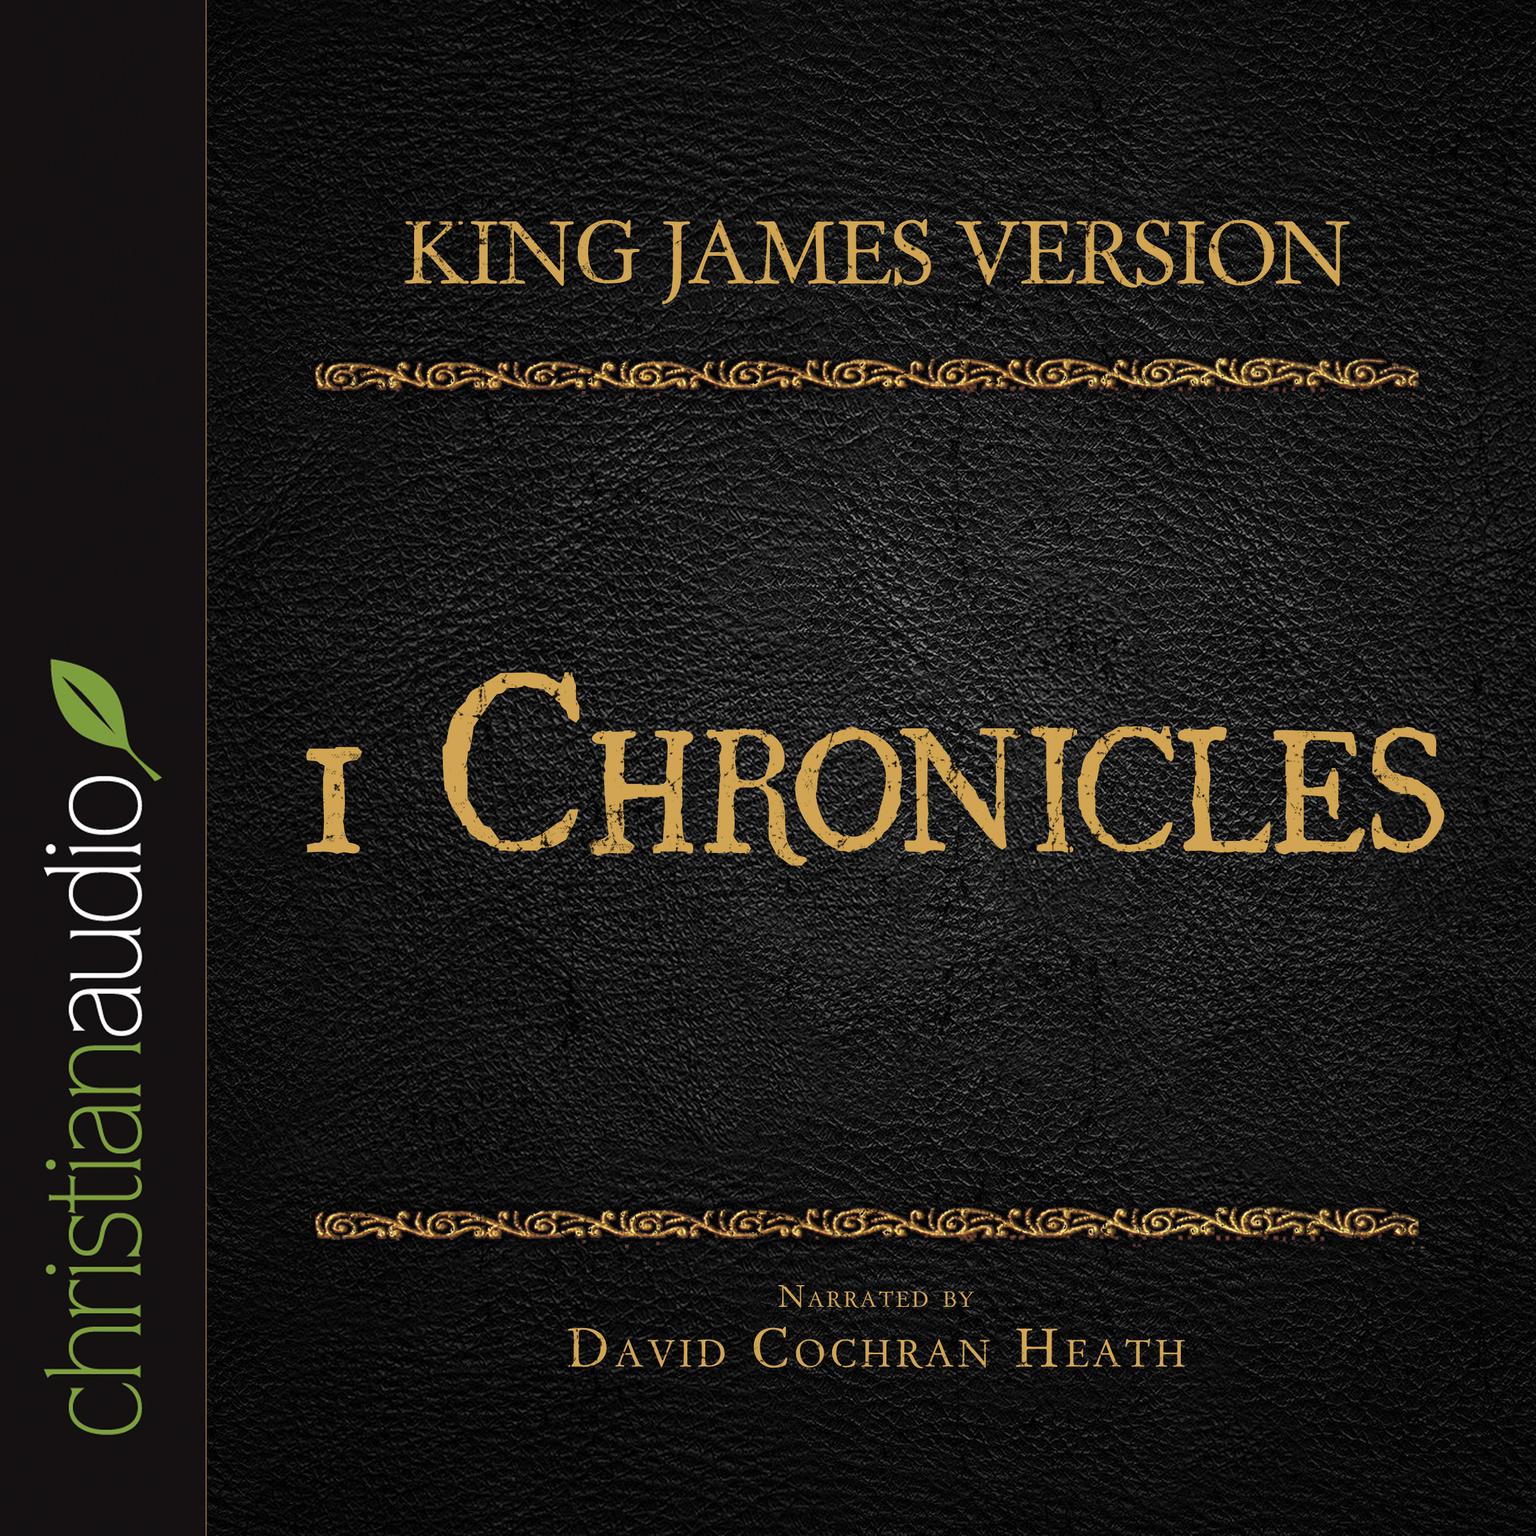 Holy Bible in Audio - King James Version: 1 Chronicles Audiobook, by David Cochran Heath